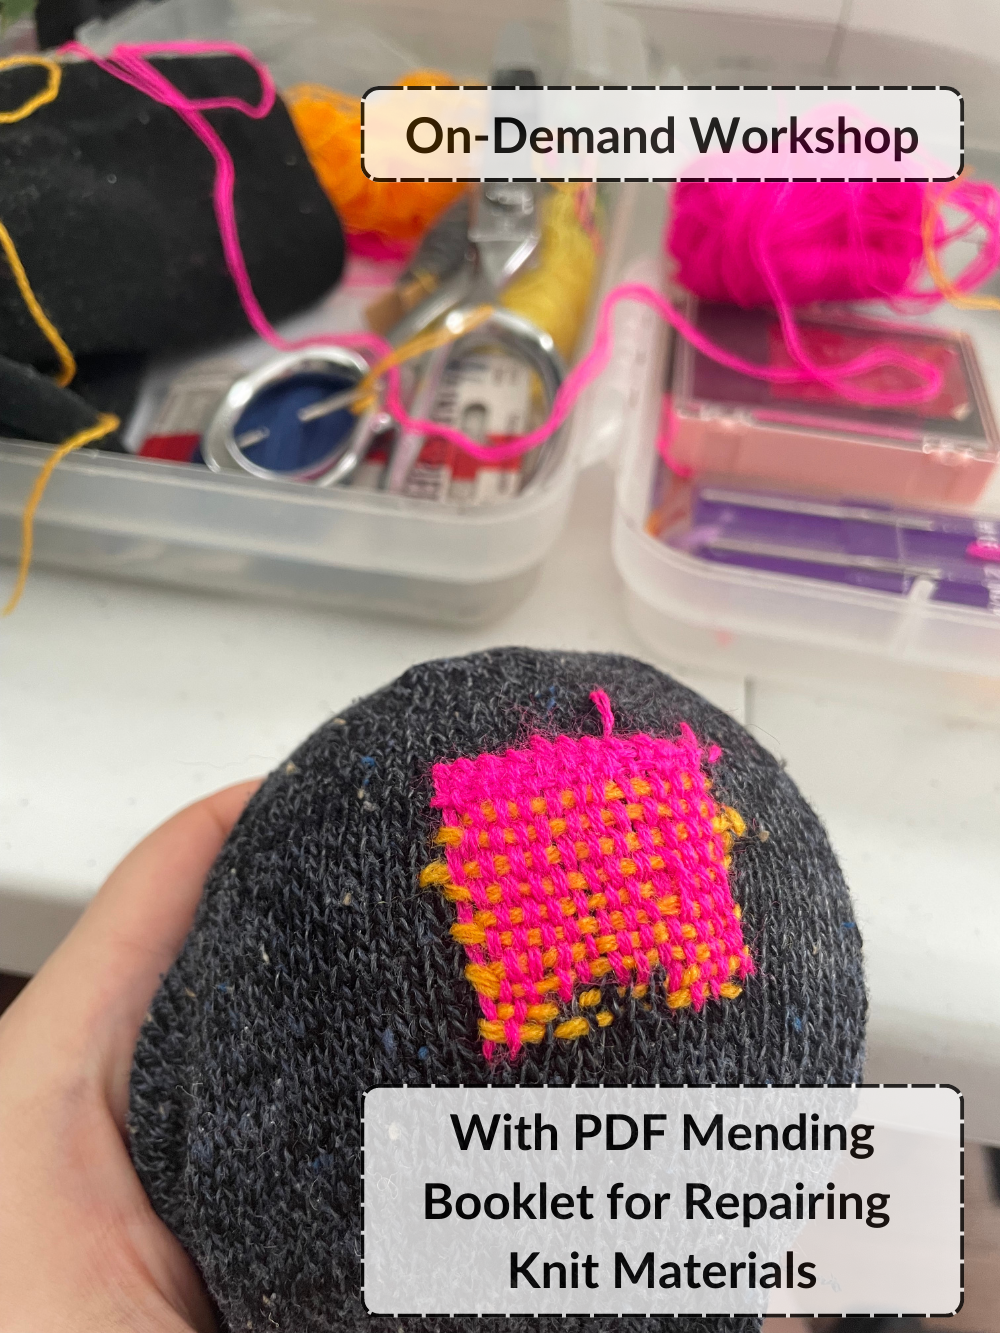 Hot pink and yellow darn on grey sock. Mending supplies in the background. Text: On-demand workshop. With PDF mending booklet for repairing knit materials